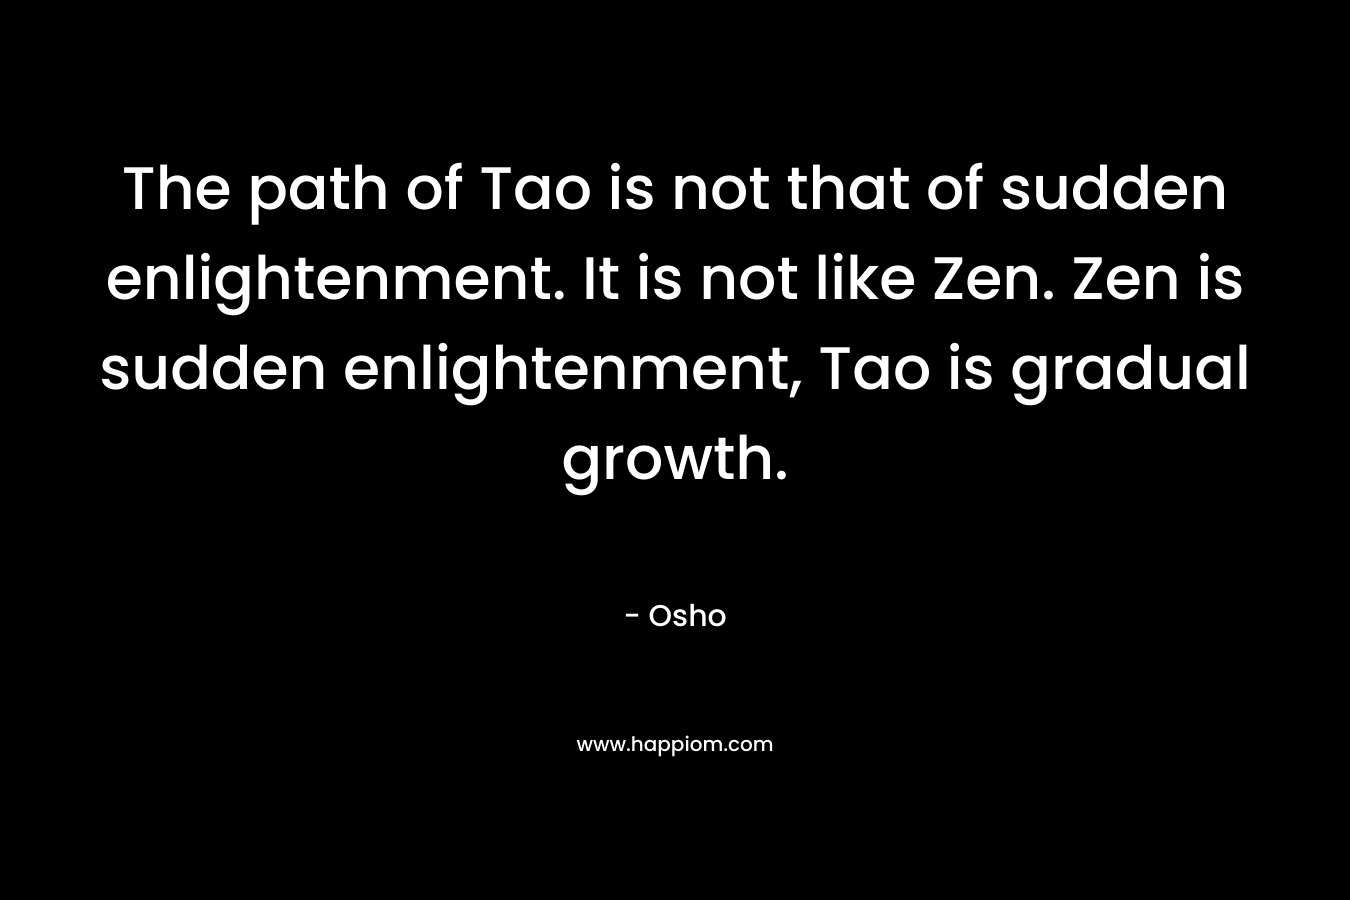 The path of Tao is not that of sudden enlightenment. It is not like Zen. Zen is sudden enlightenment, Tao is gradual growth. – Osho